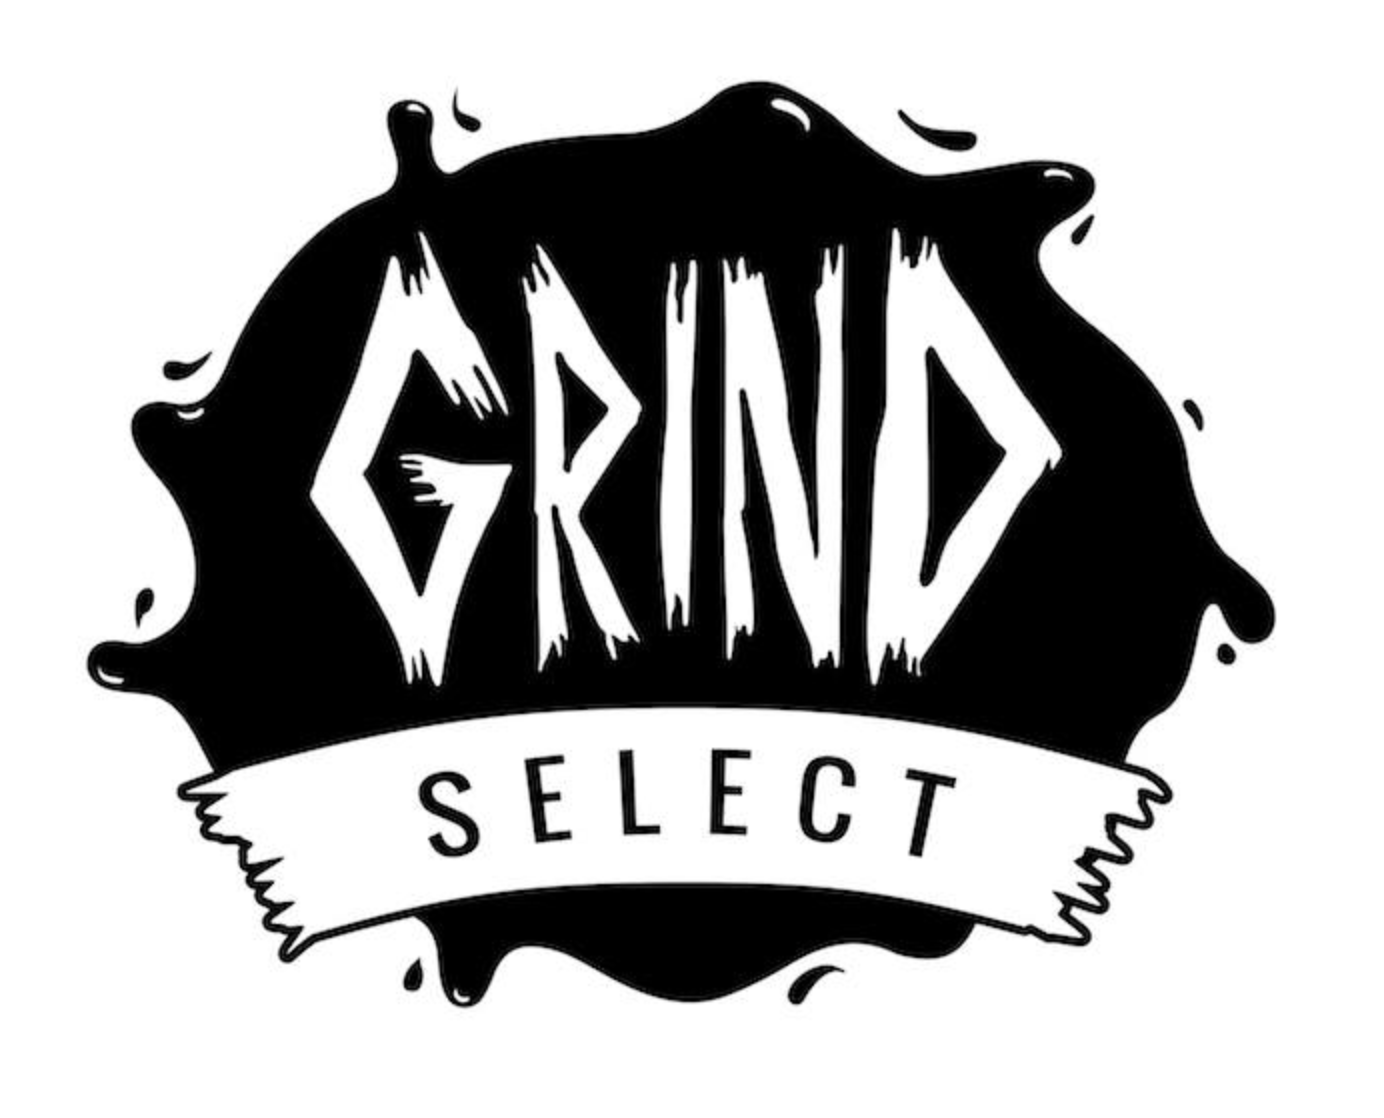 Grind Select Records Trademark.png